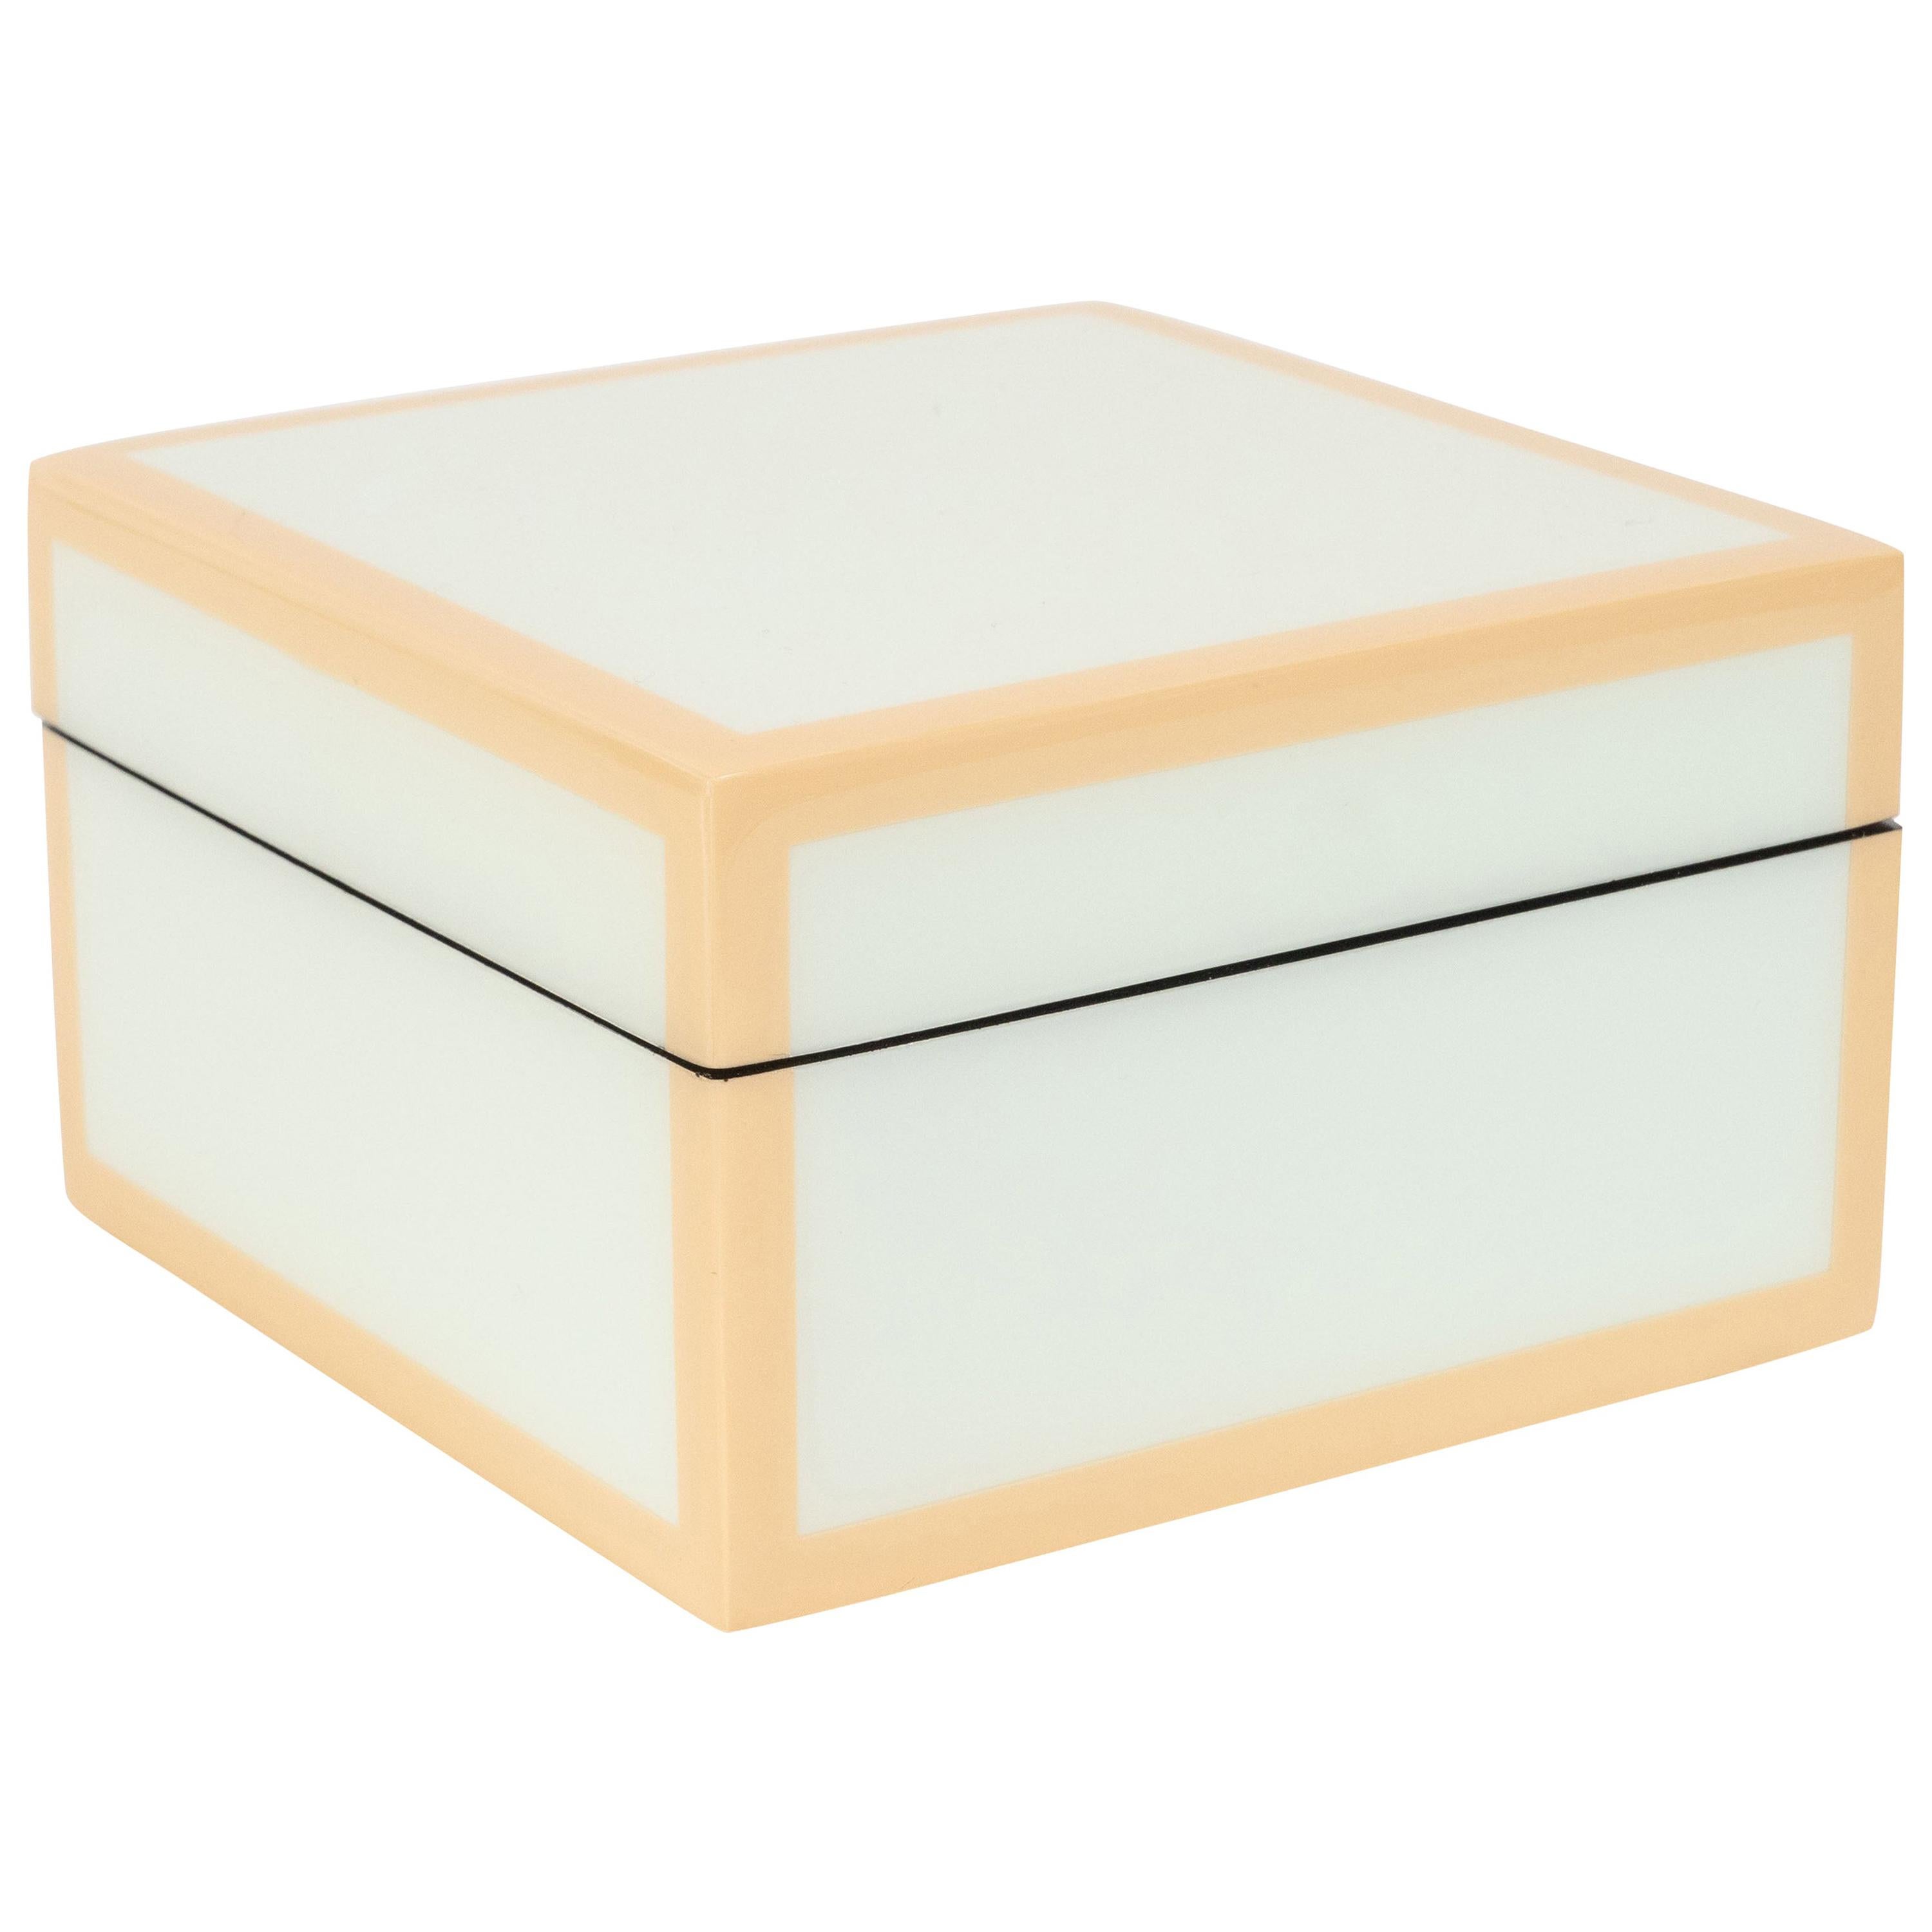 Modernist Square Lacquered Square Box in Pale Celadon with Tan Accents